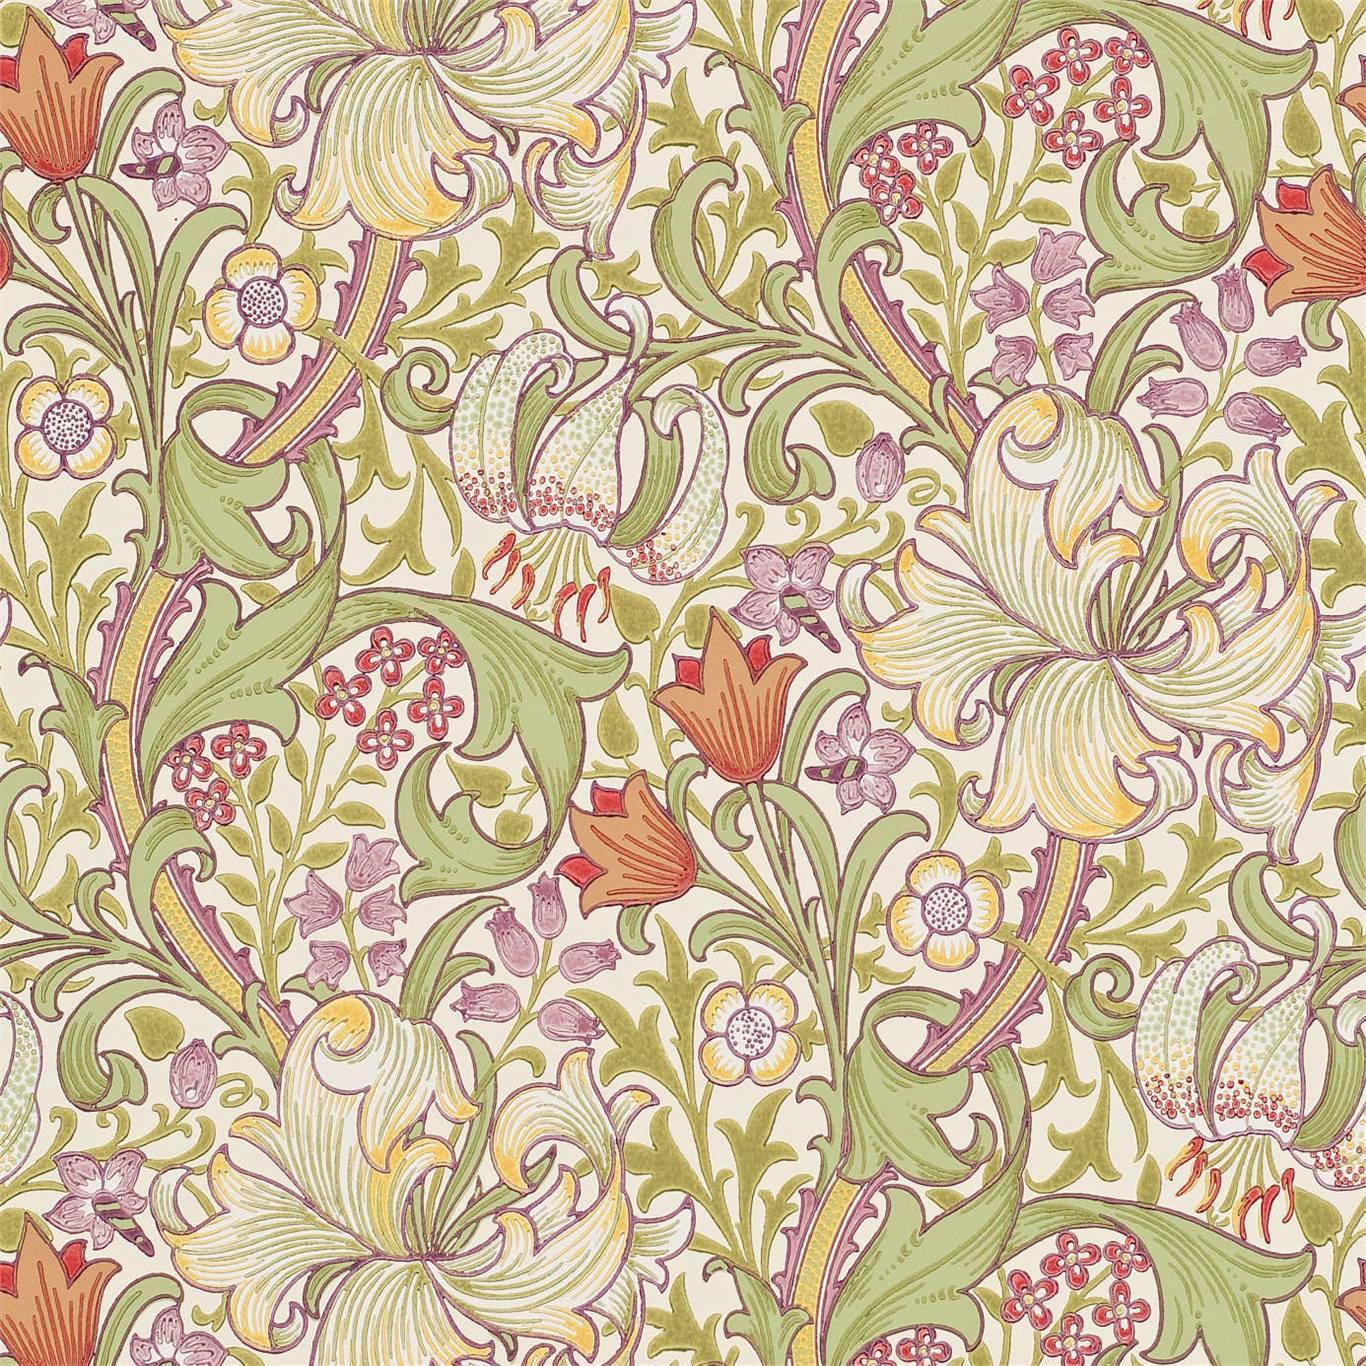 William Morris Golden Lily Wallpaper Decor Zoffany Olive/Russet 